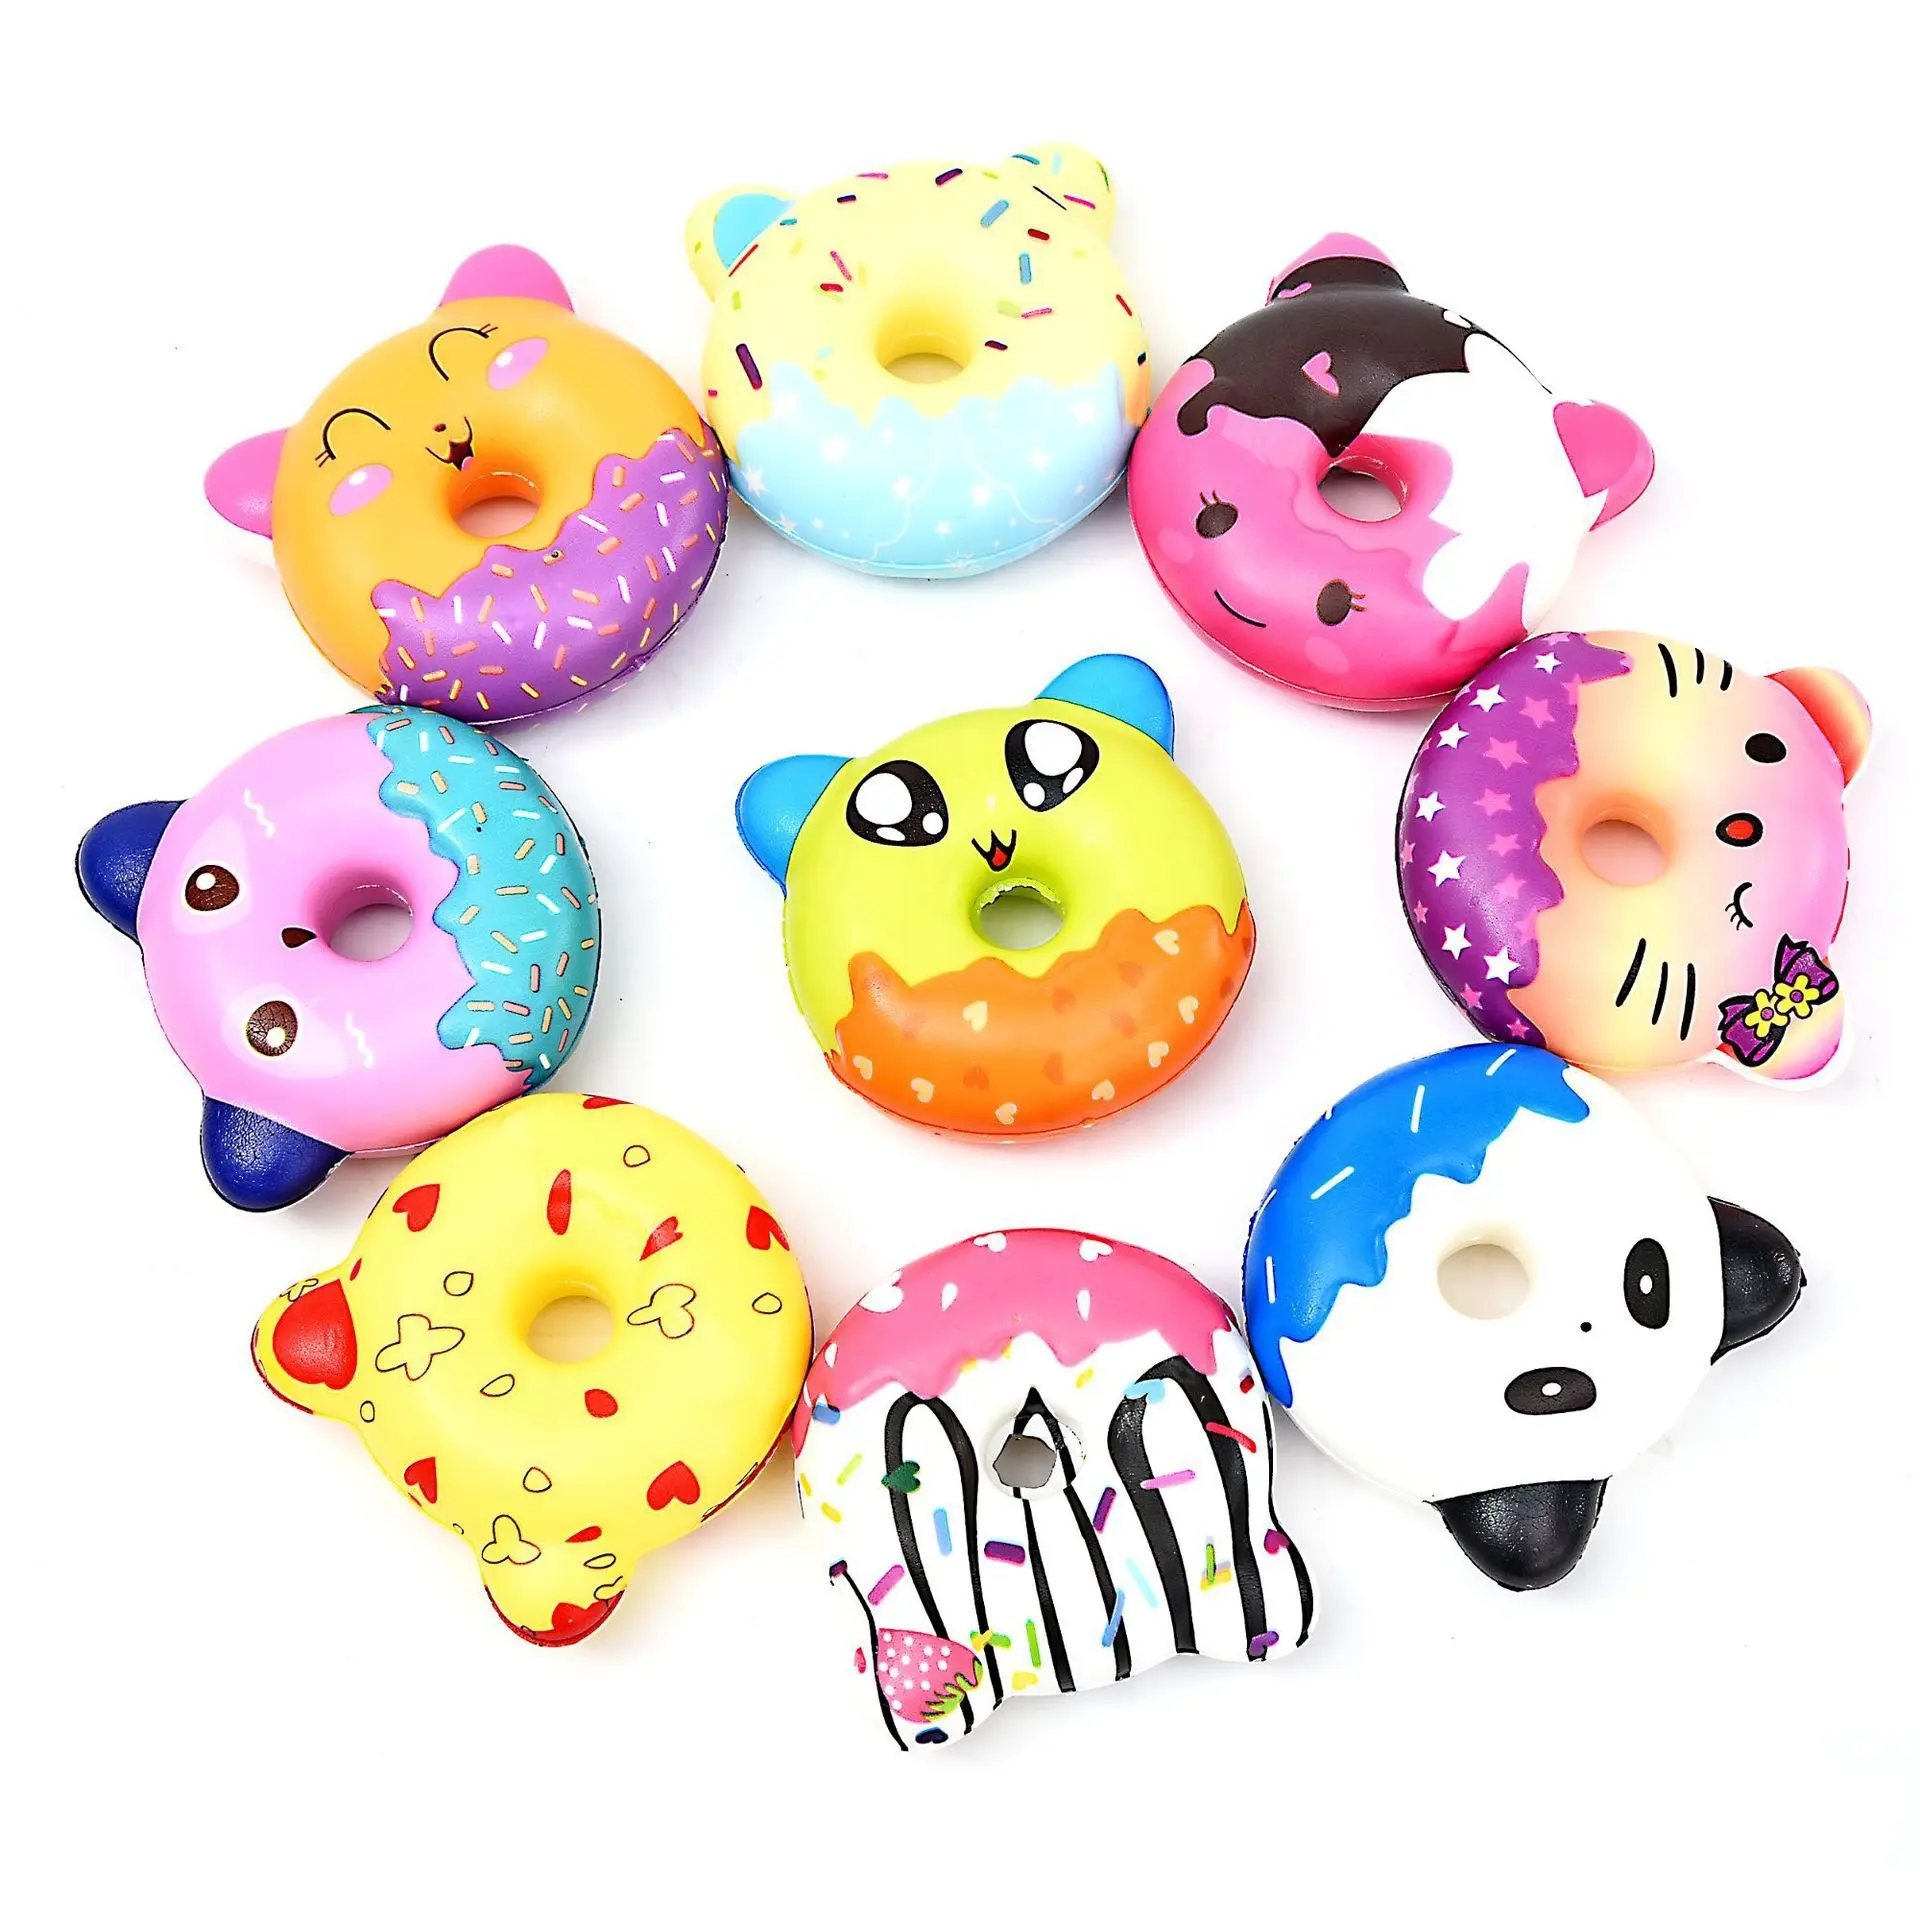 Kawaii donut Squishies Squishy Scented Slow Rising Stress Relief Toy Panda Donuts Cat Kids Toy Squishy Fidget Toy